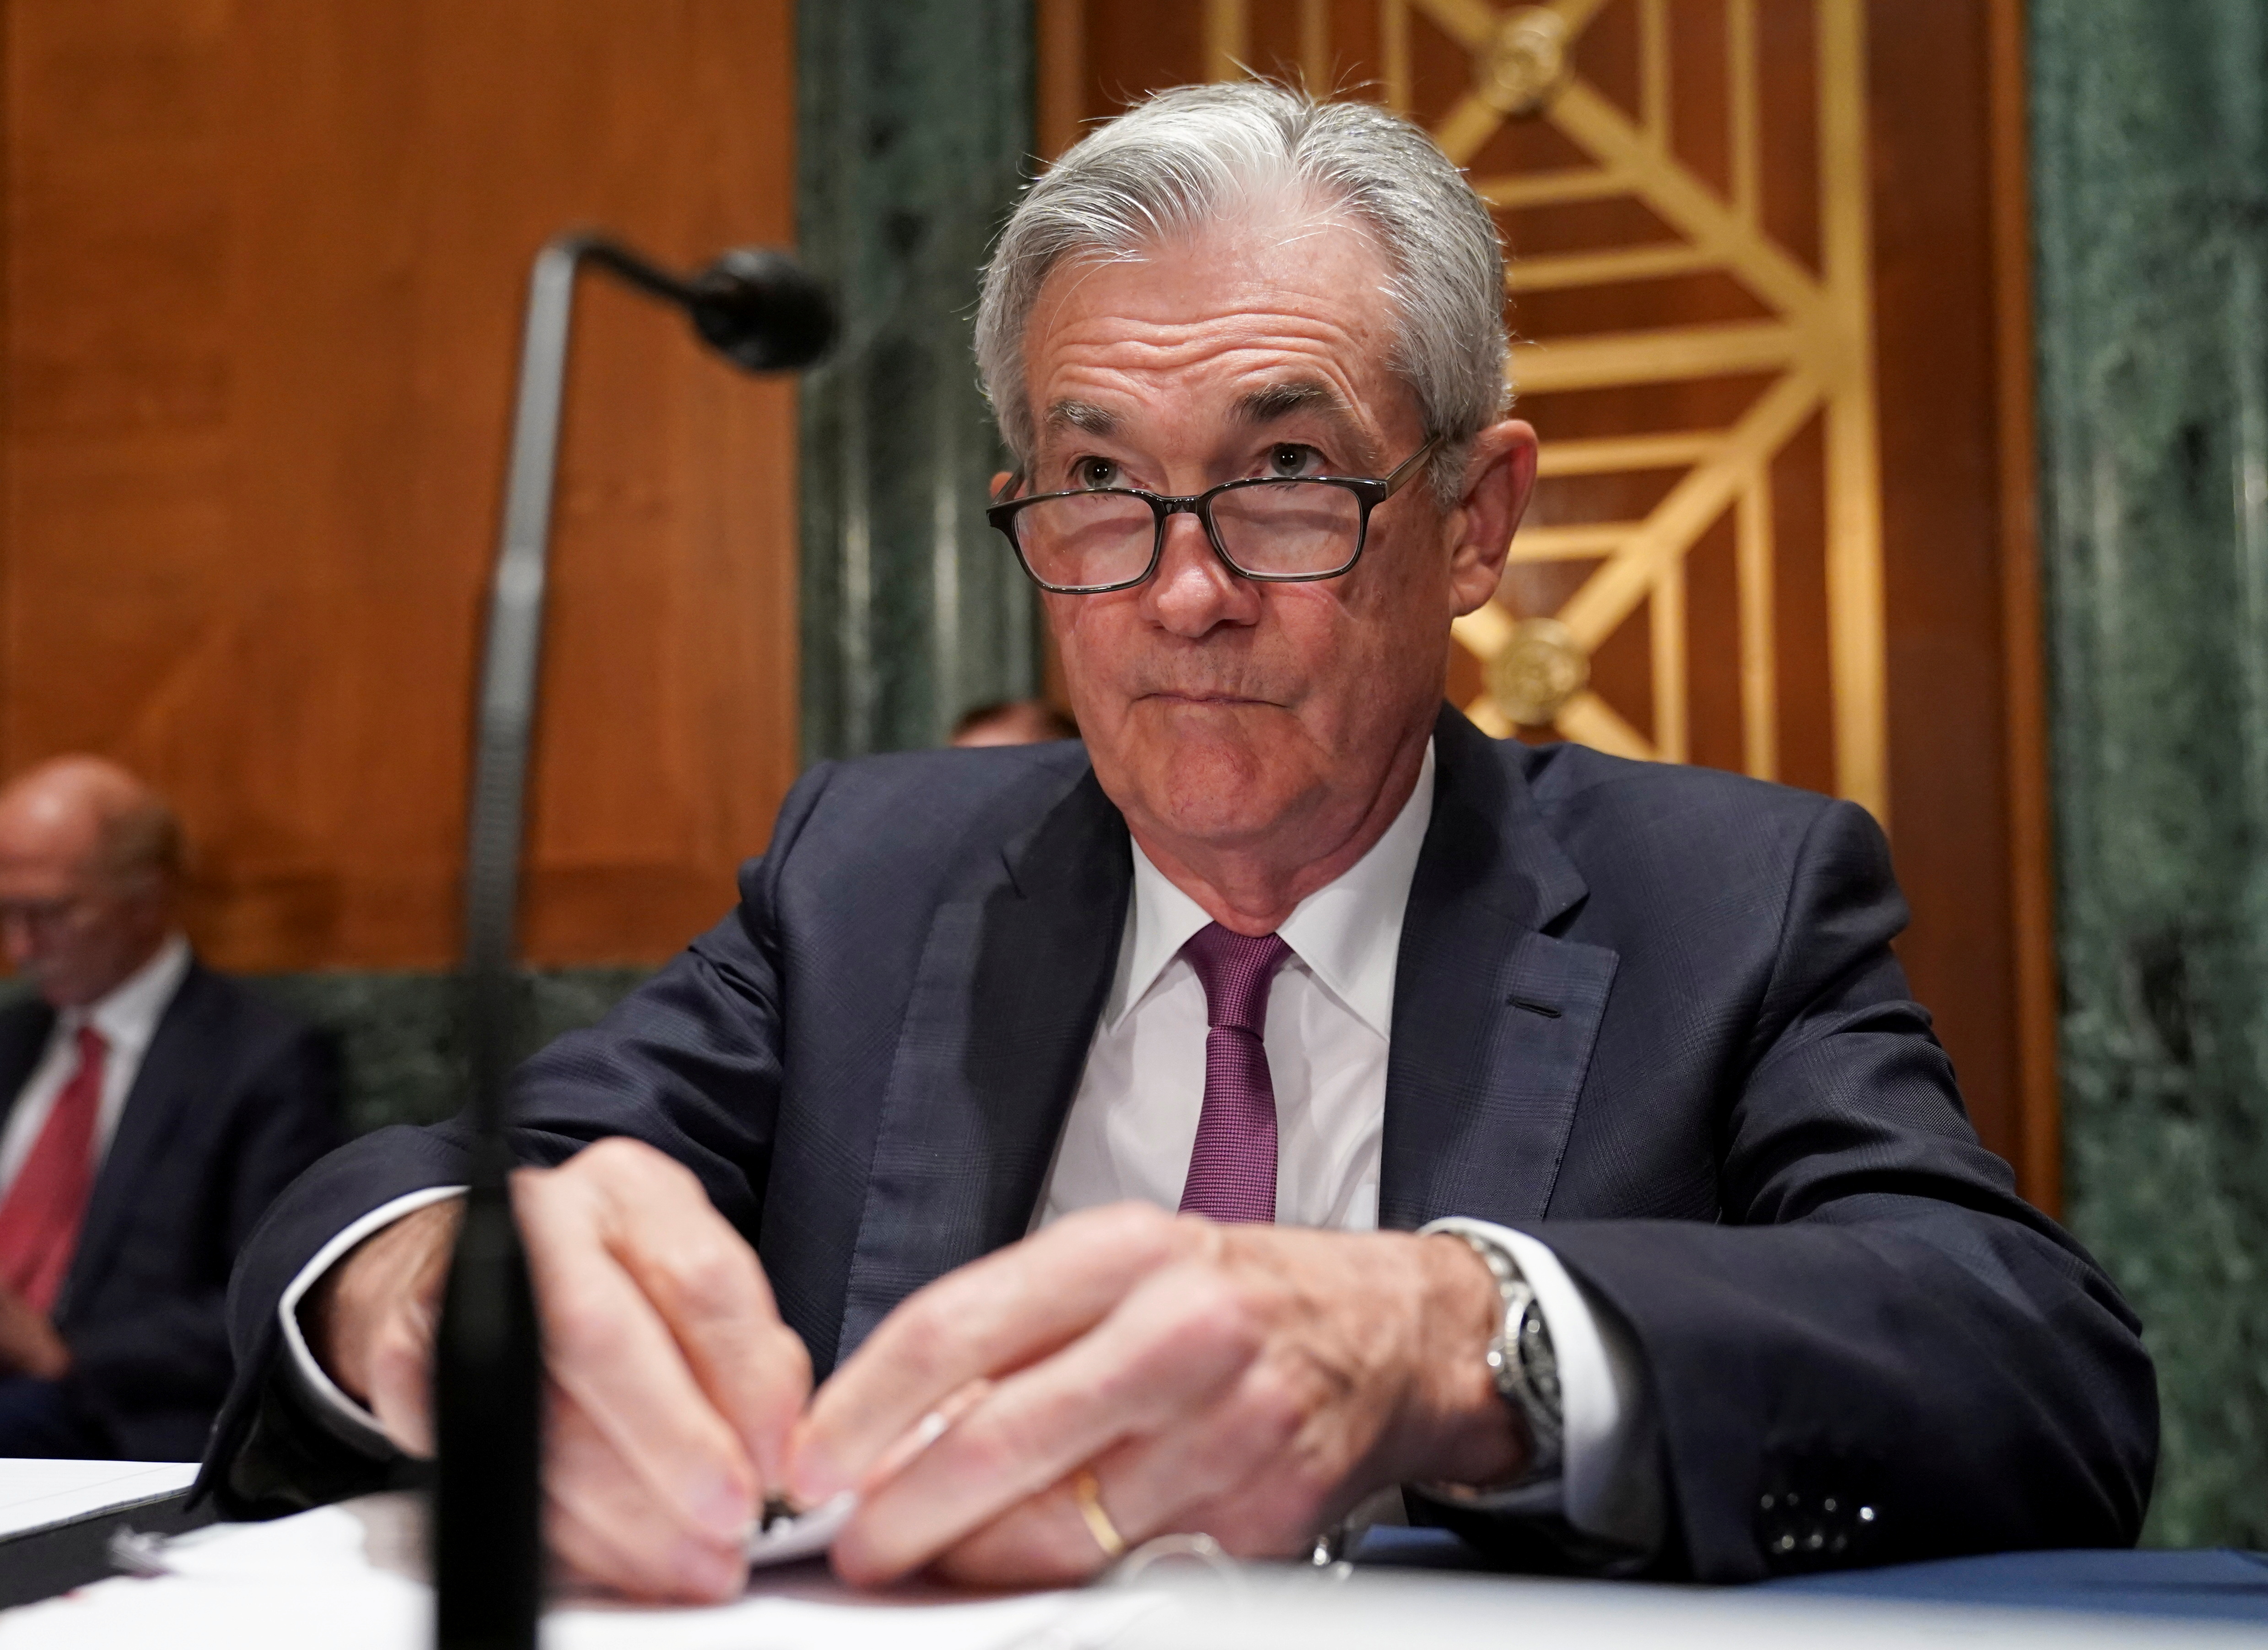 Federal Reserve Chairman Jerome Powell takes his seat to testify before a Senate Banking, Housing and Urban Affairs Committee hearing on “The Semiannual Monetary Policy Report to the Congress” on Capitol Hill in Washington, U.S., July 15, 2021. REUTERS/Kevin Lamarque/File Photo